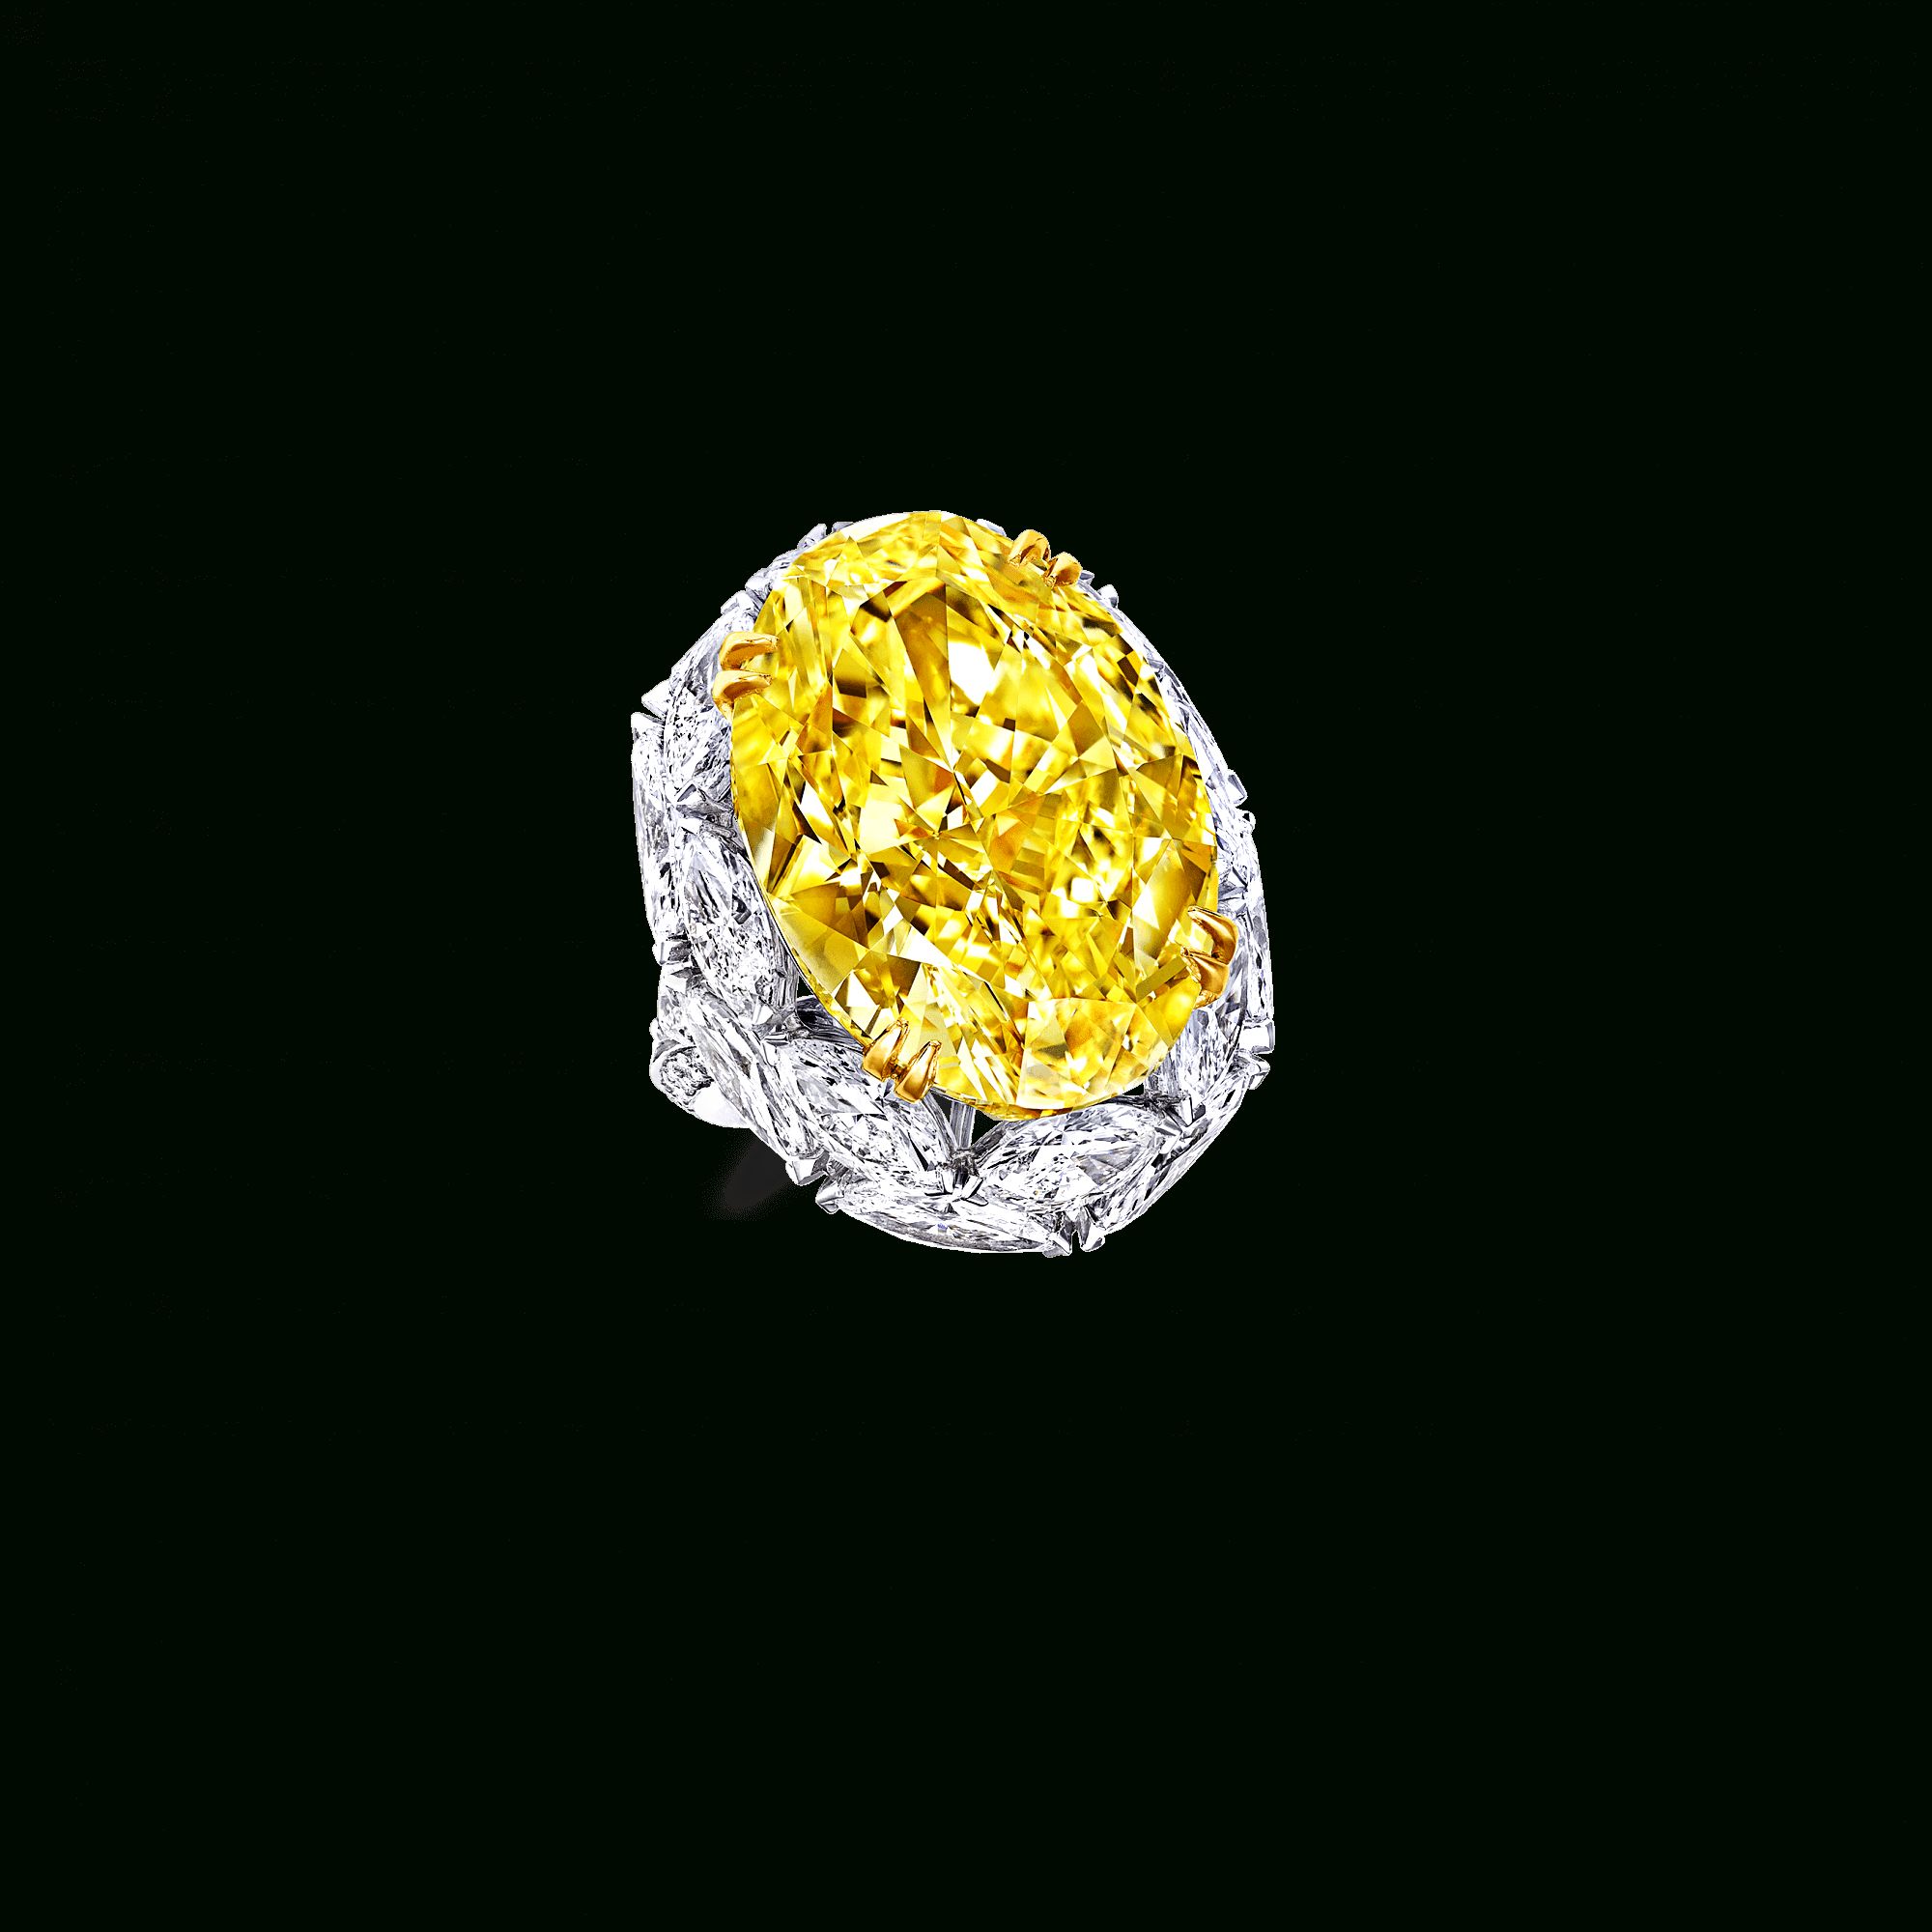 Oval Shape Yellow And White Diamond Ring | Luxury Jewelry In With Regard To Oval Shaped Yellow Diamond Rings (View 18 of 25)